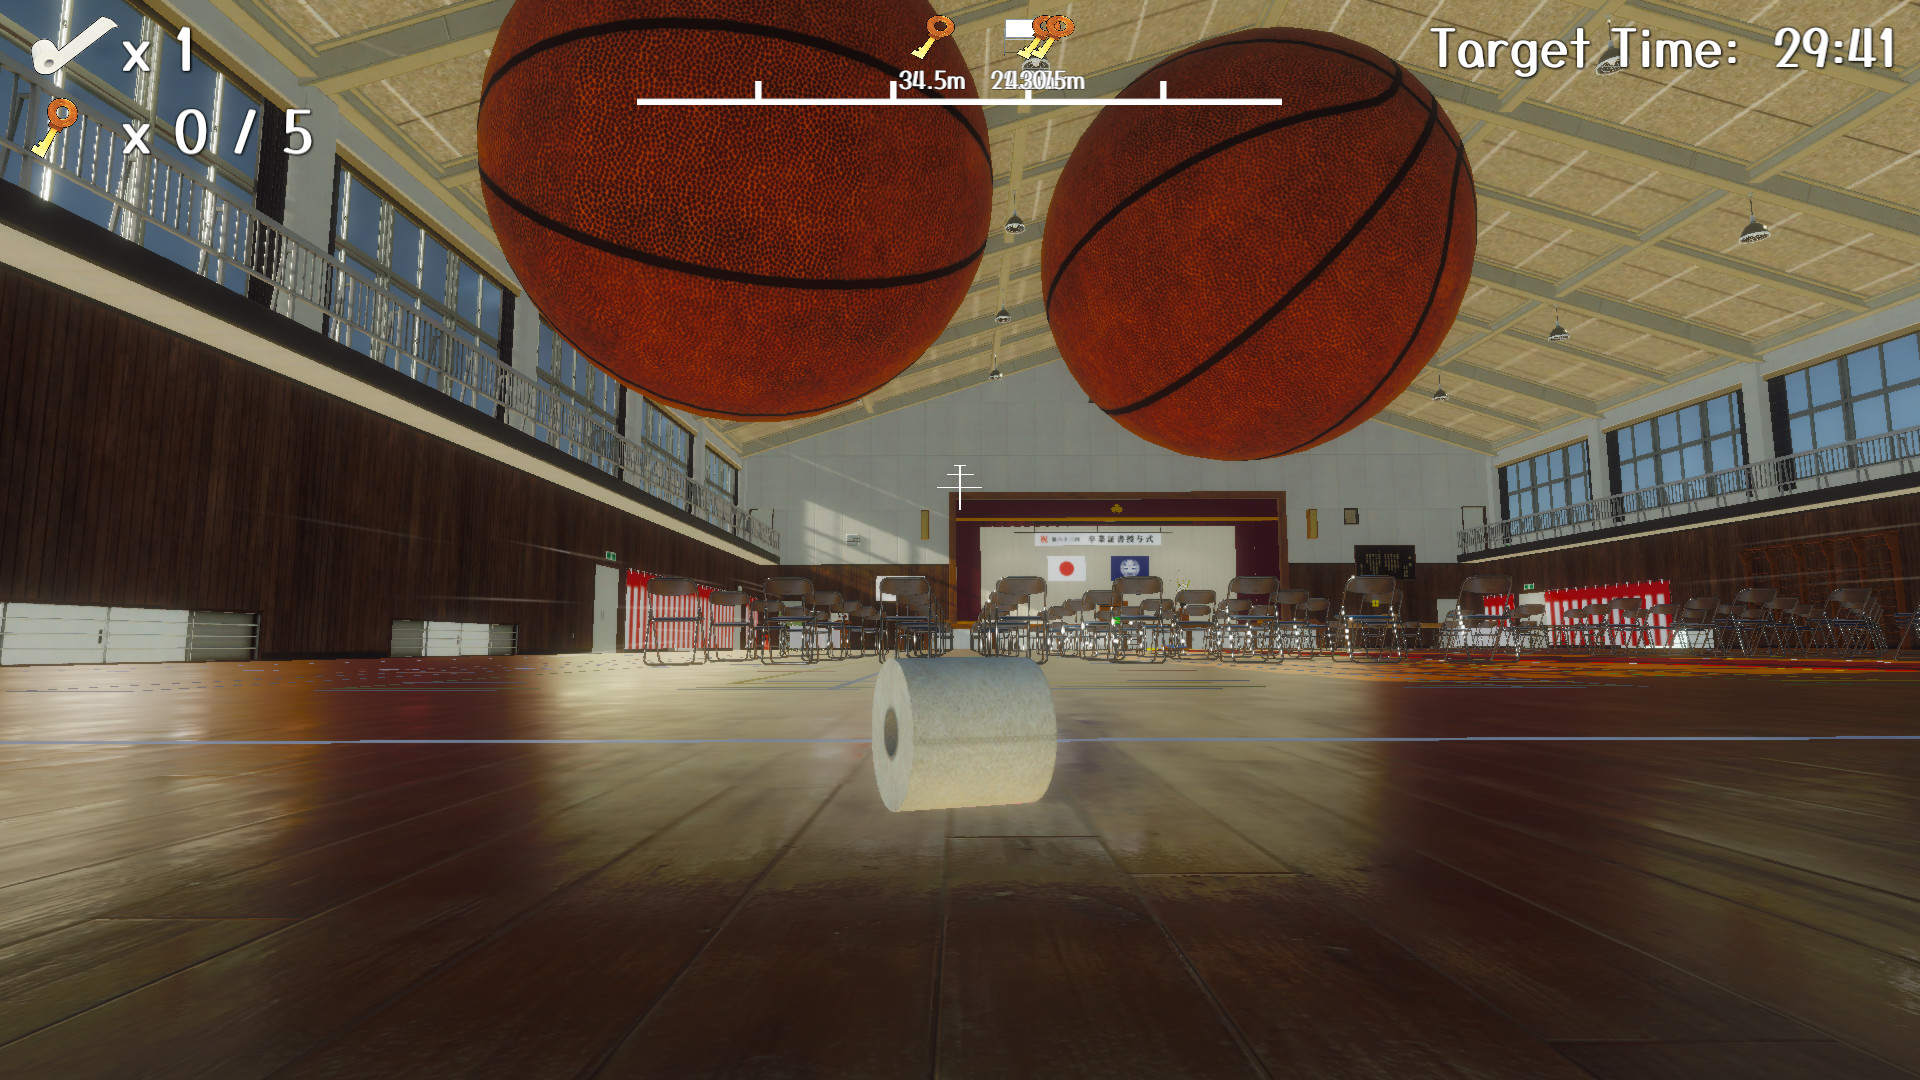 Toilet paper wants to be a basketball screenshot